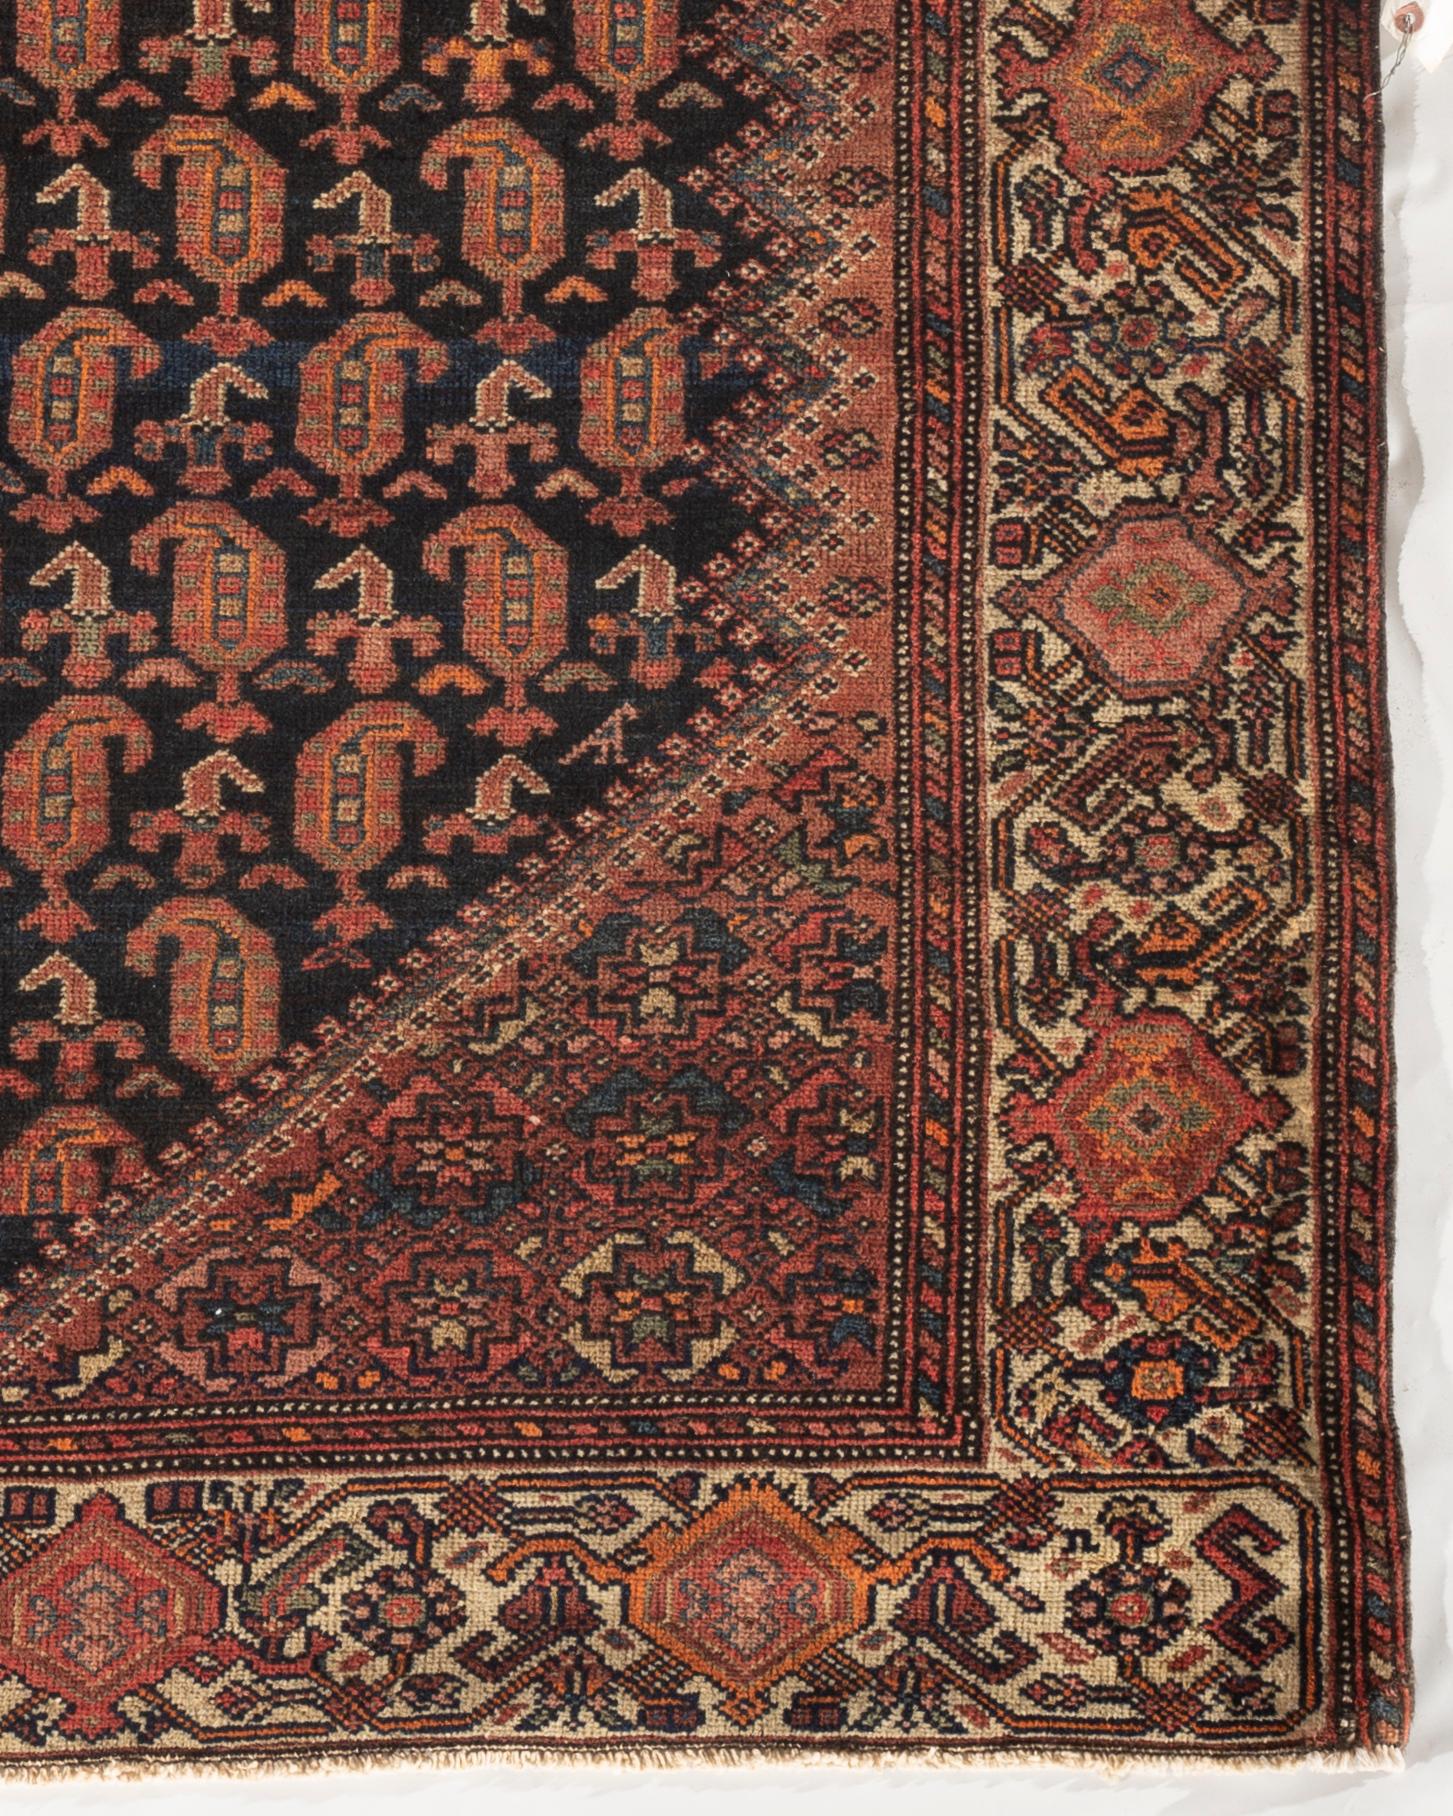 Antique Persian Malayer rug, circa 1900. The central deep navy field filled with boteh’s and surrounded by an ivory border with floral designs to create this charming looking and harmonious rug. Antique rugs from Malayer, east of Hamadan, could be